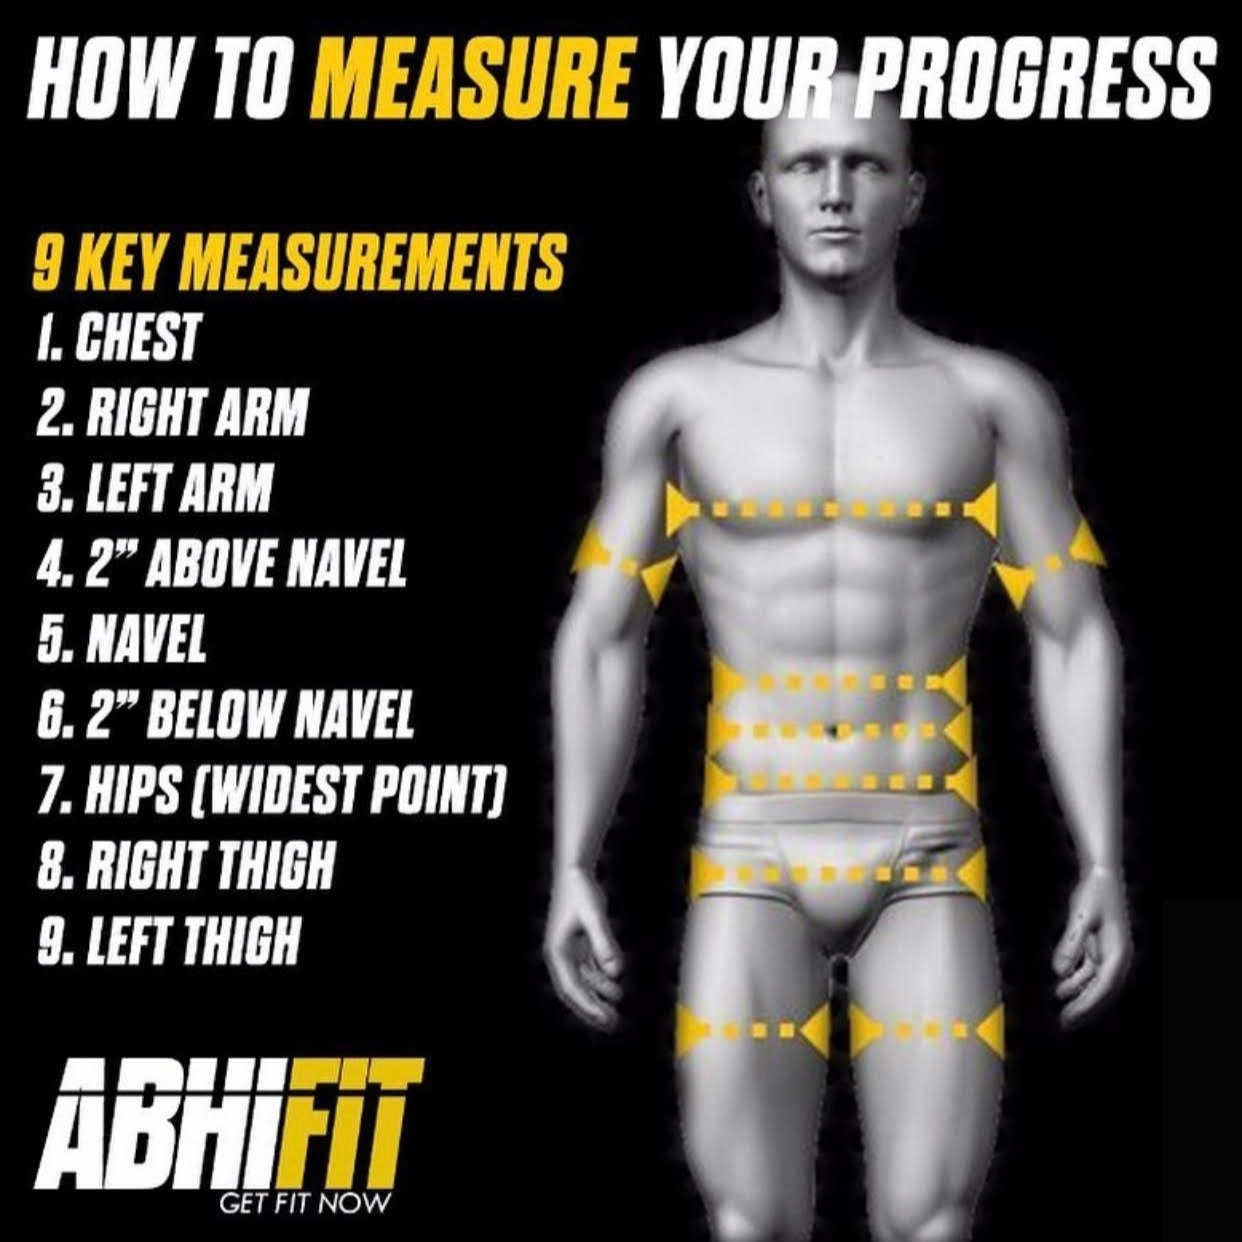 How to Measure Muscle Growth Progress